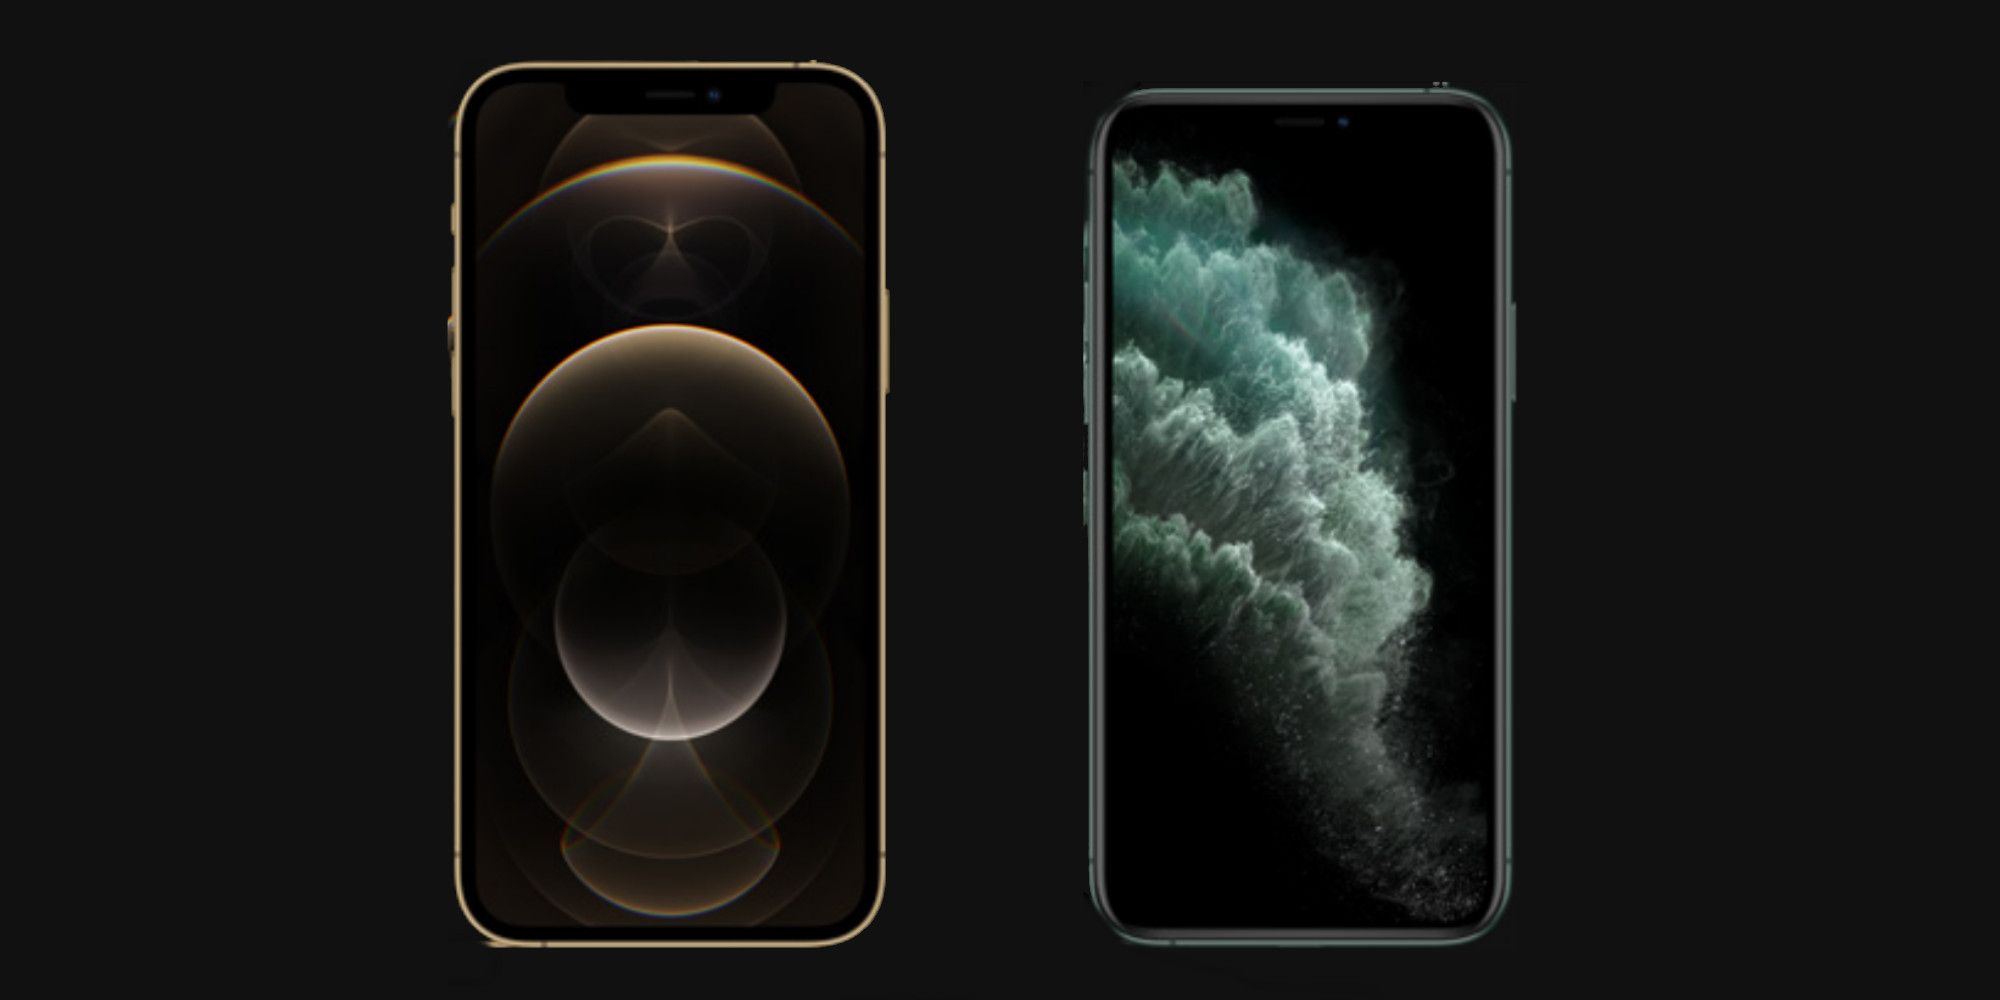 The iphone 12 Pro against the 11 pro compare